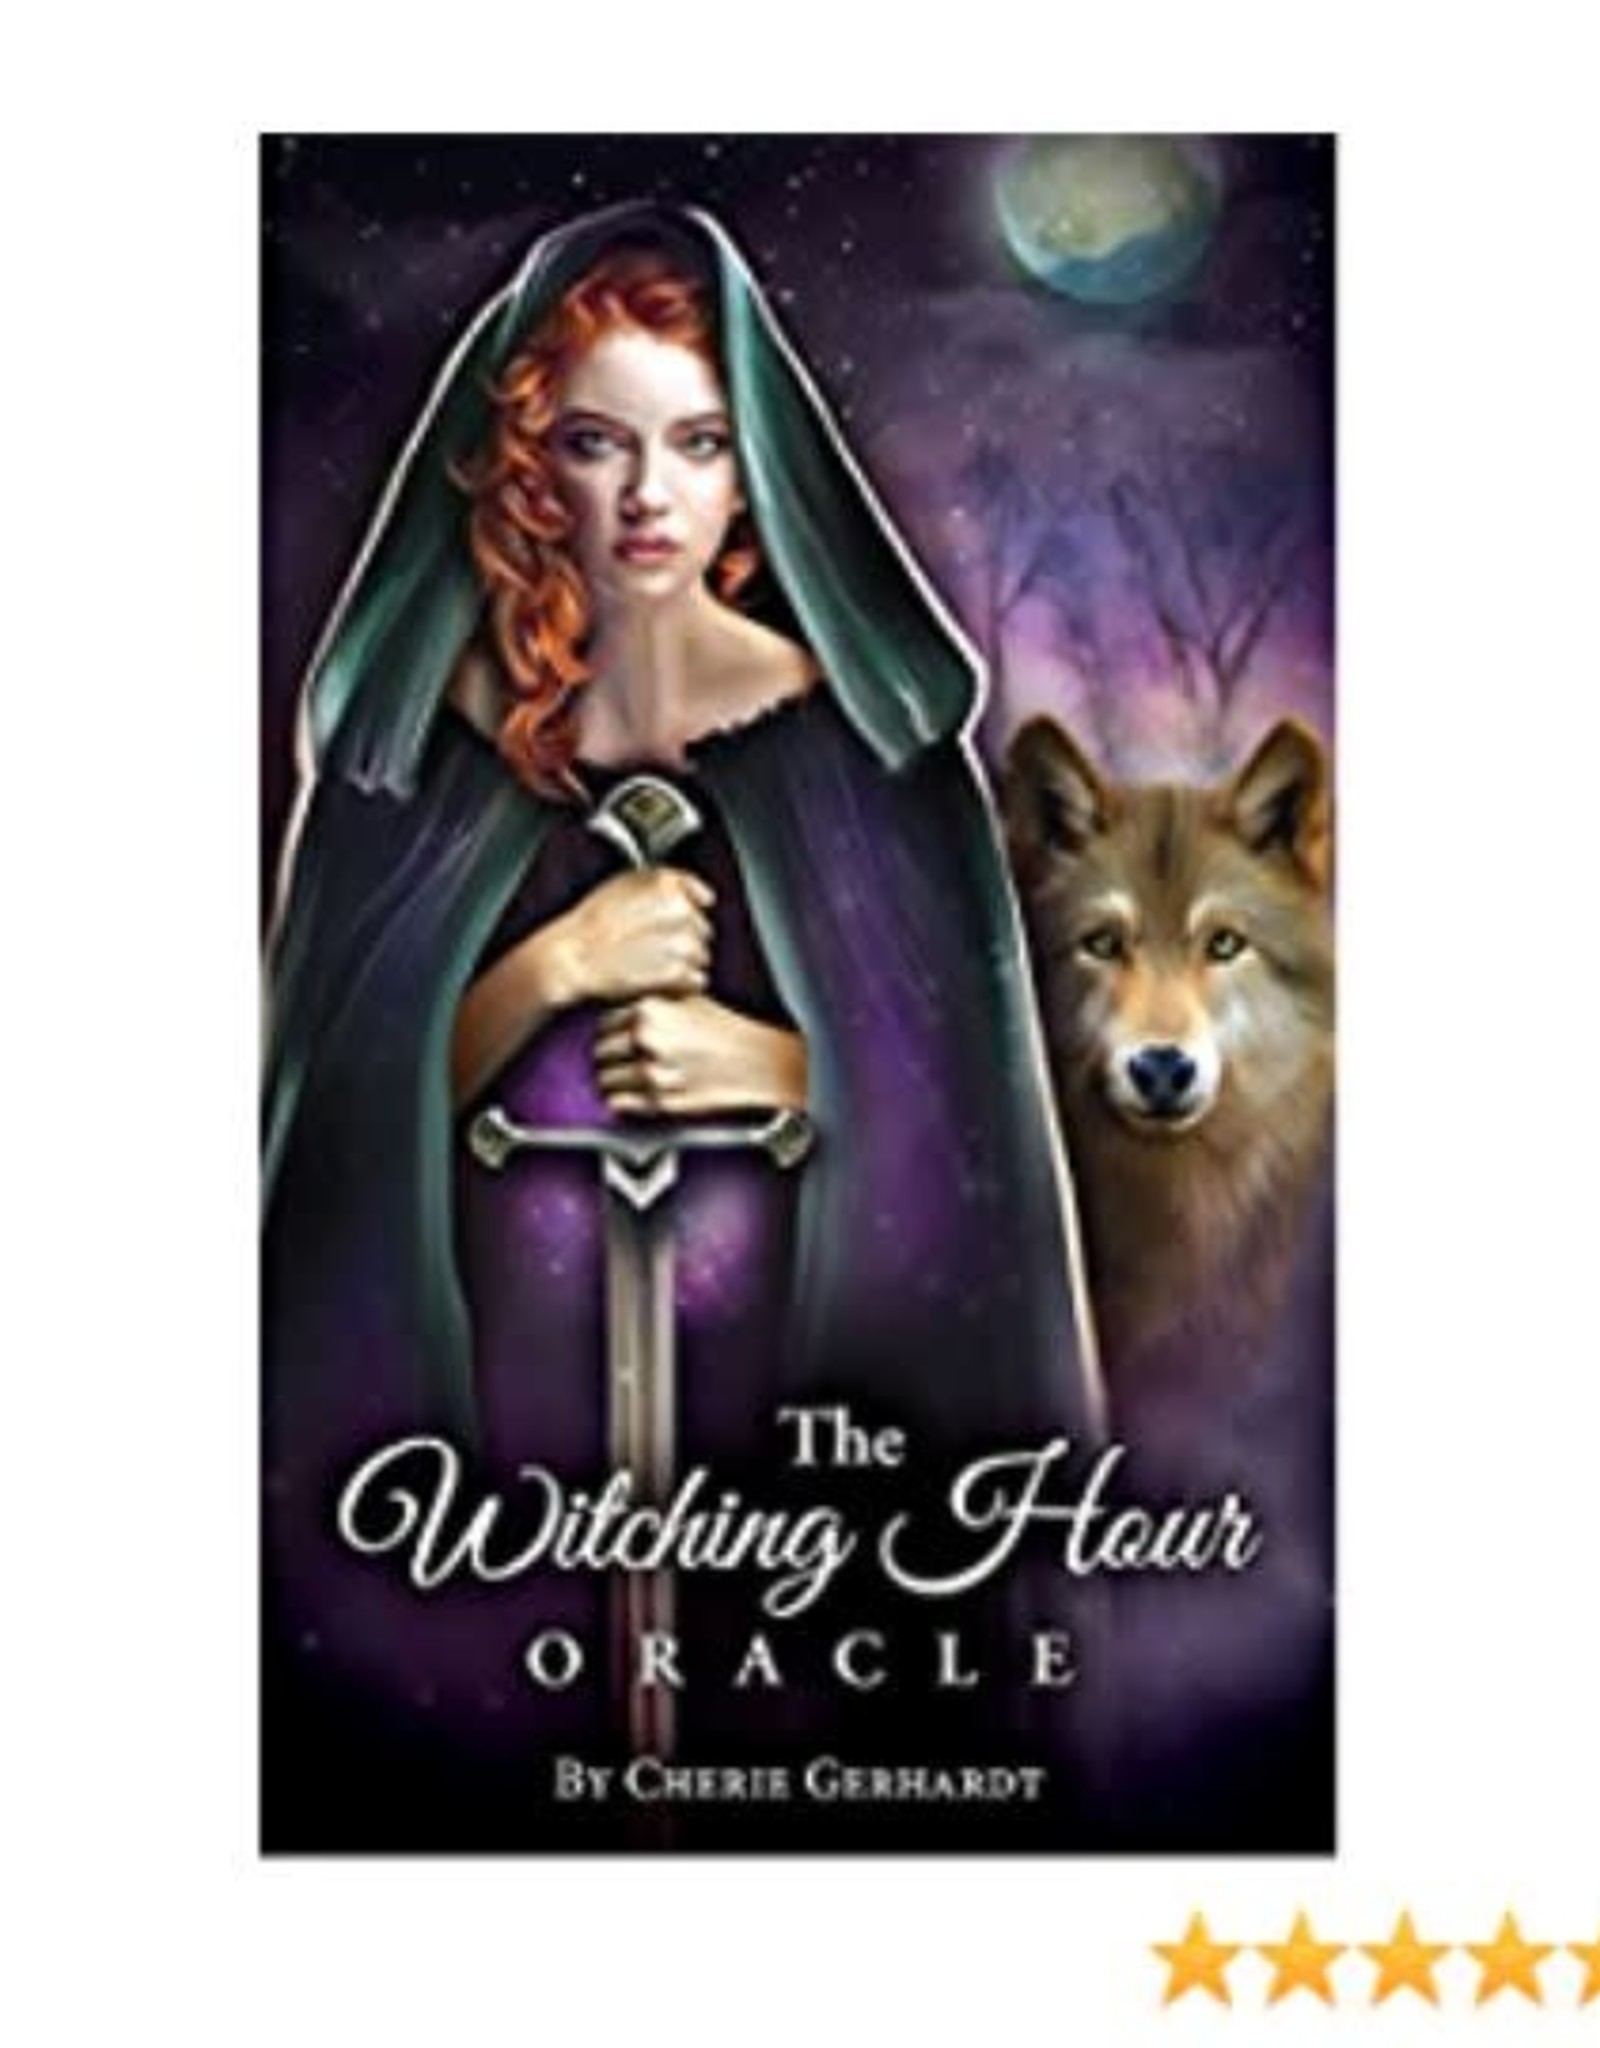 Witching Hour Oracle by Cherie Gerhardt